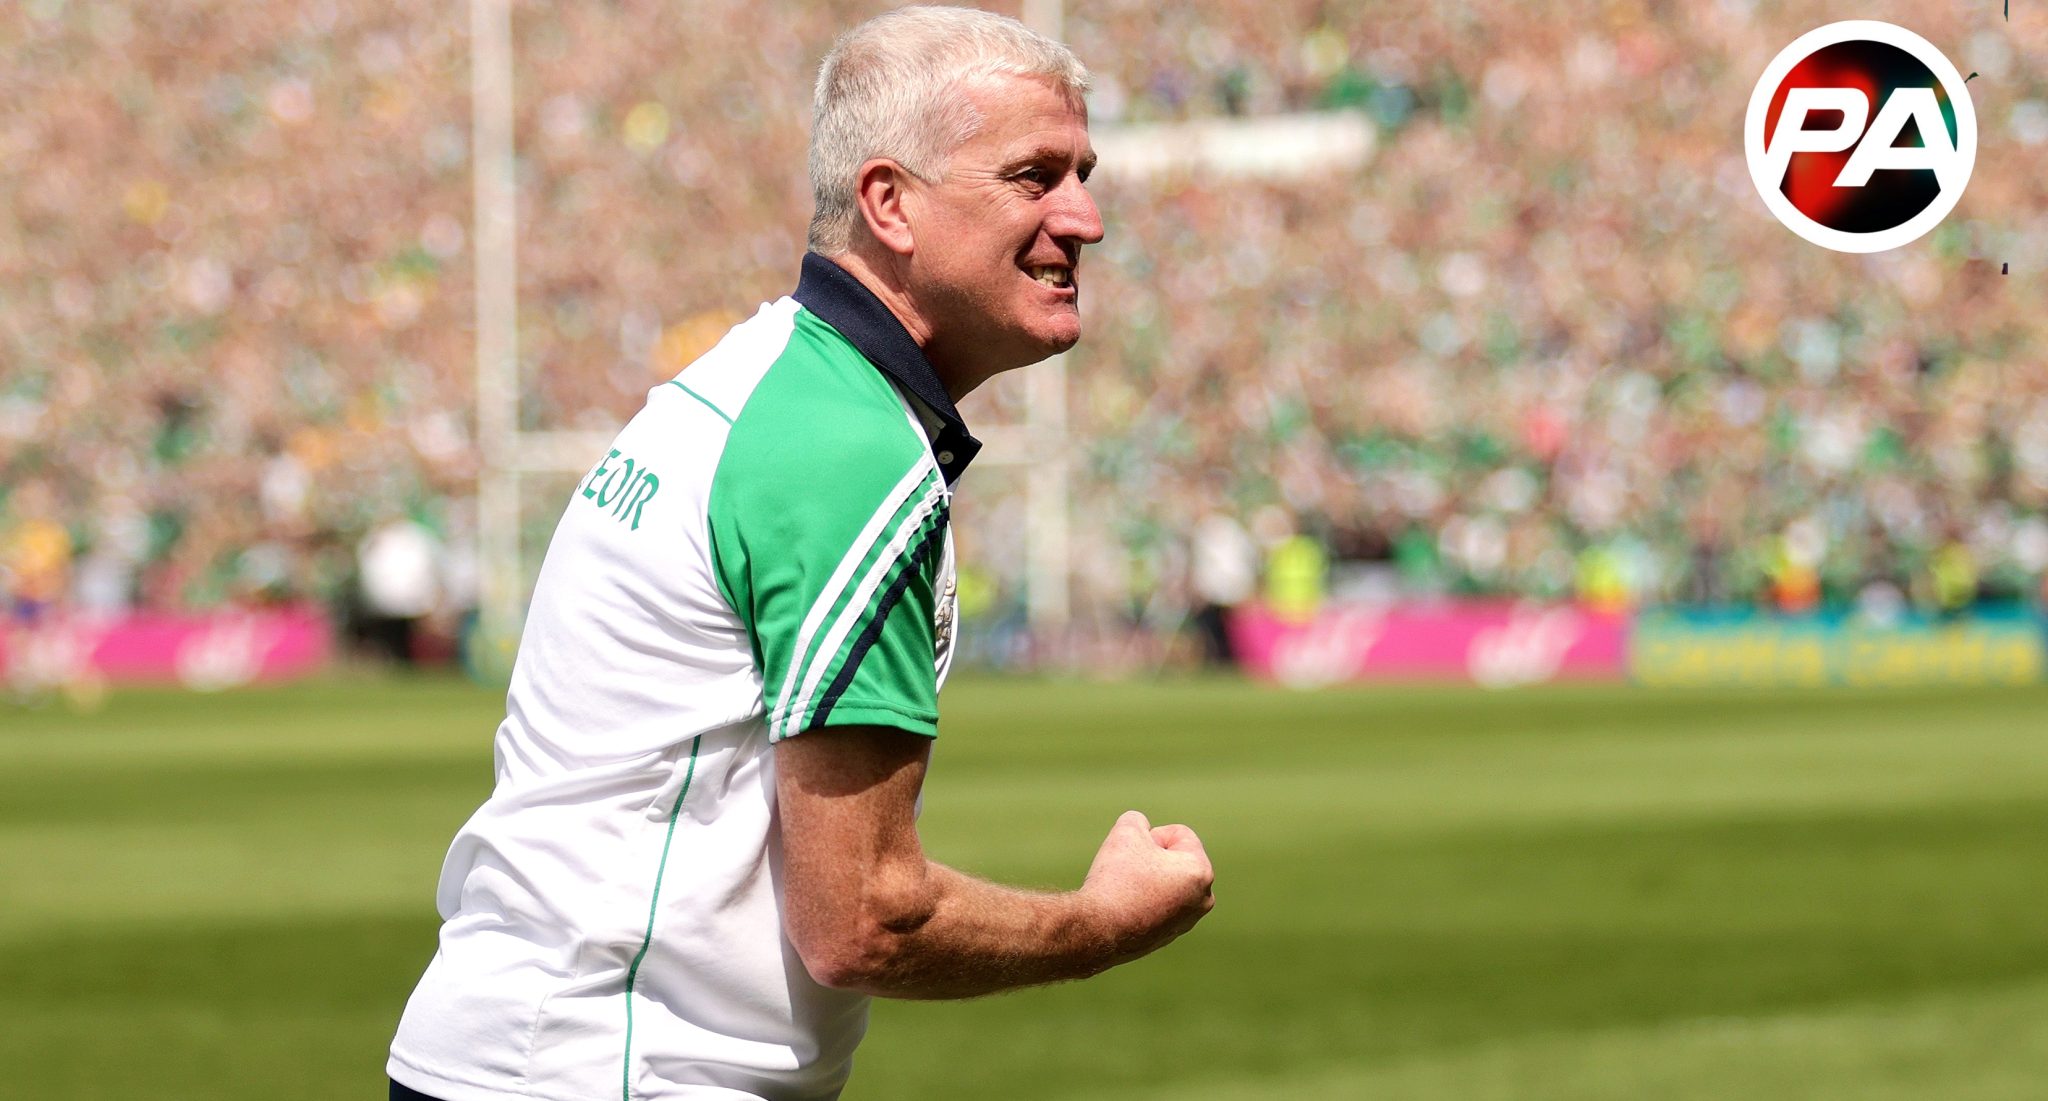 Limerick will be without Declan Hannon for the All Ireland Hurling Final